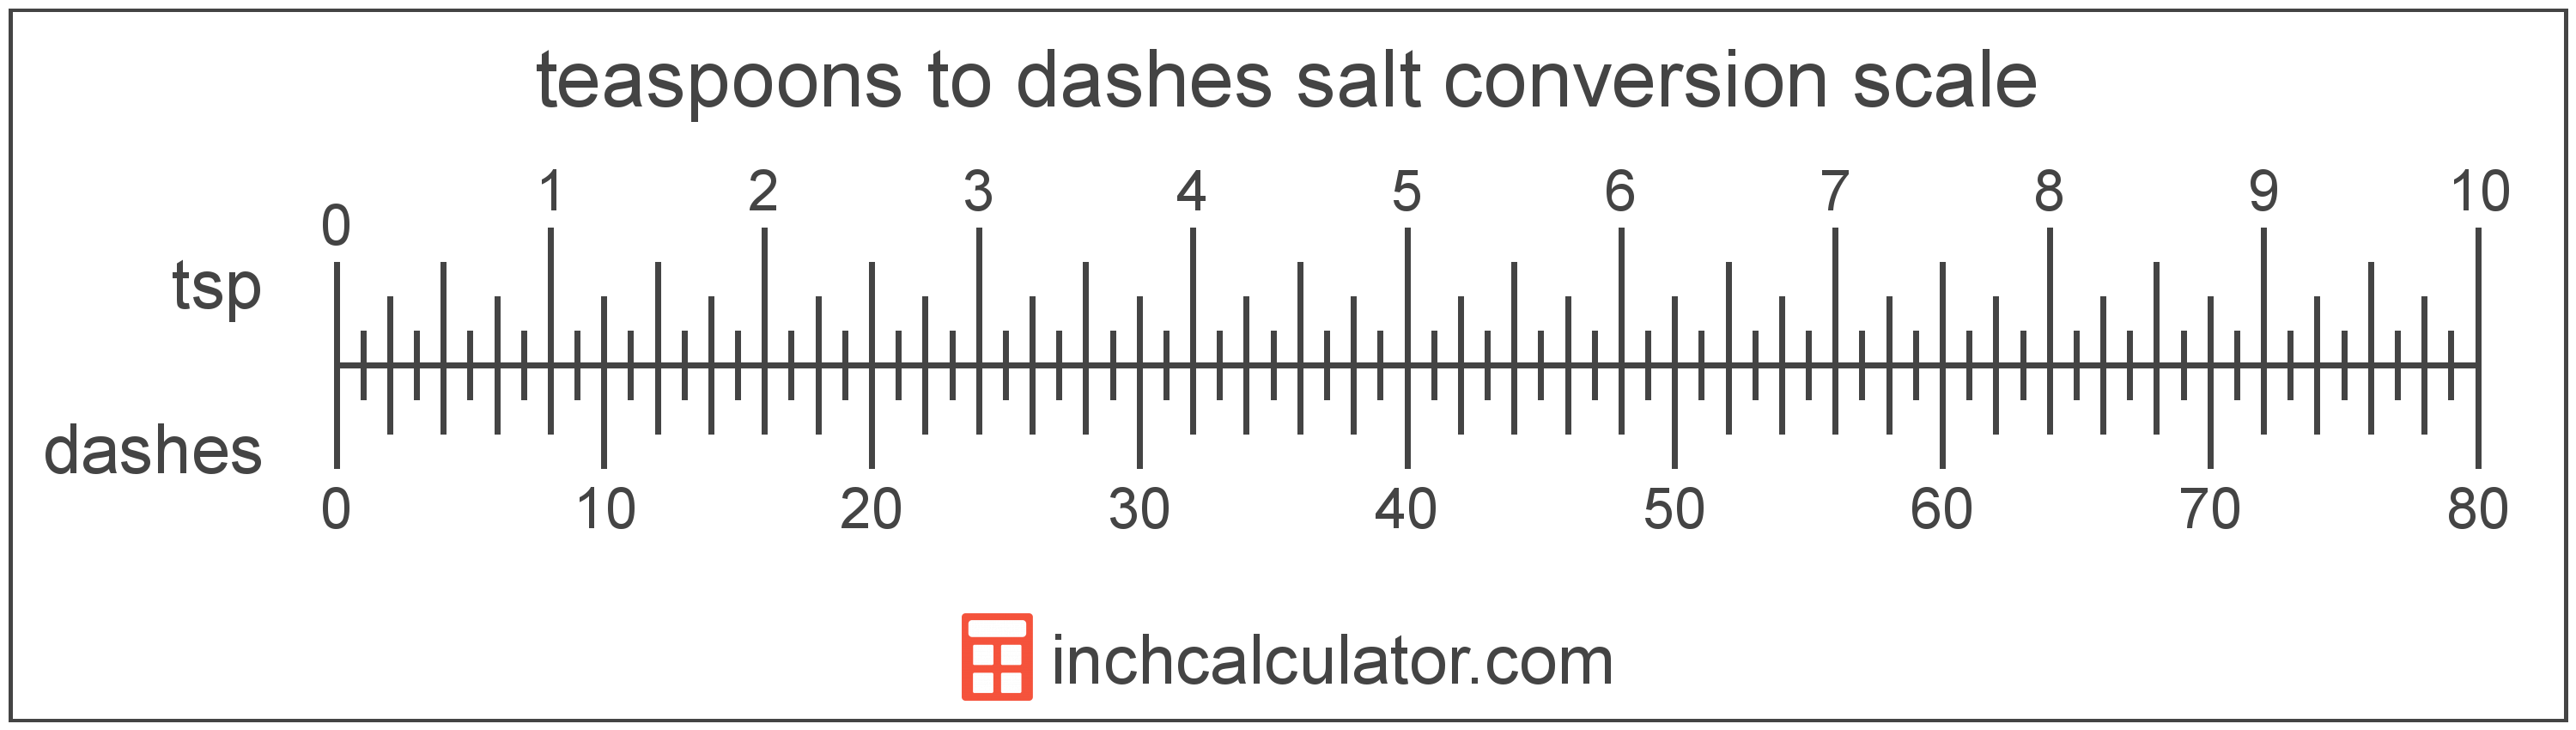 conversion scale showing dashes and equivalent teaspoons salt volume values